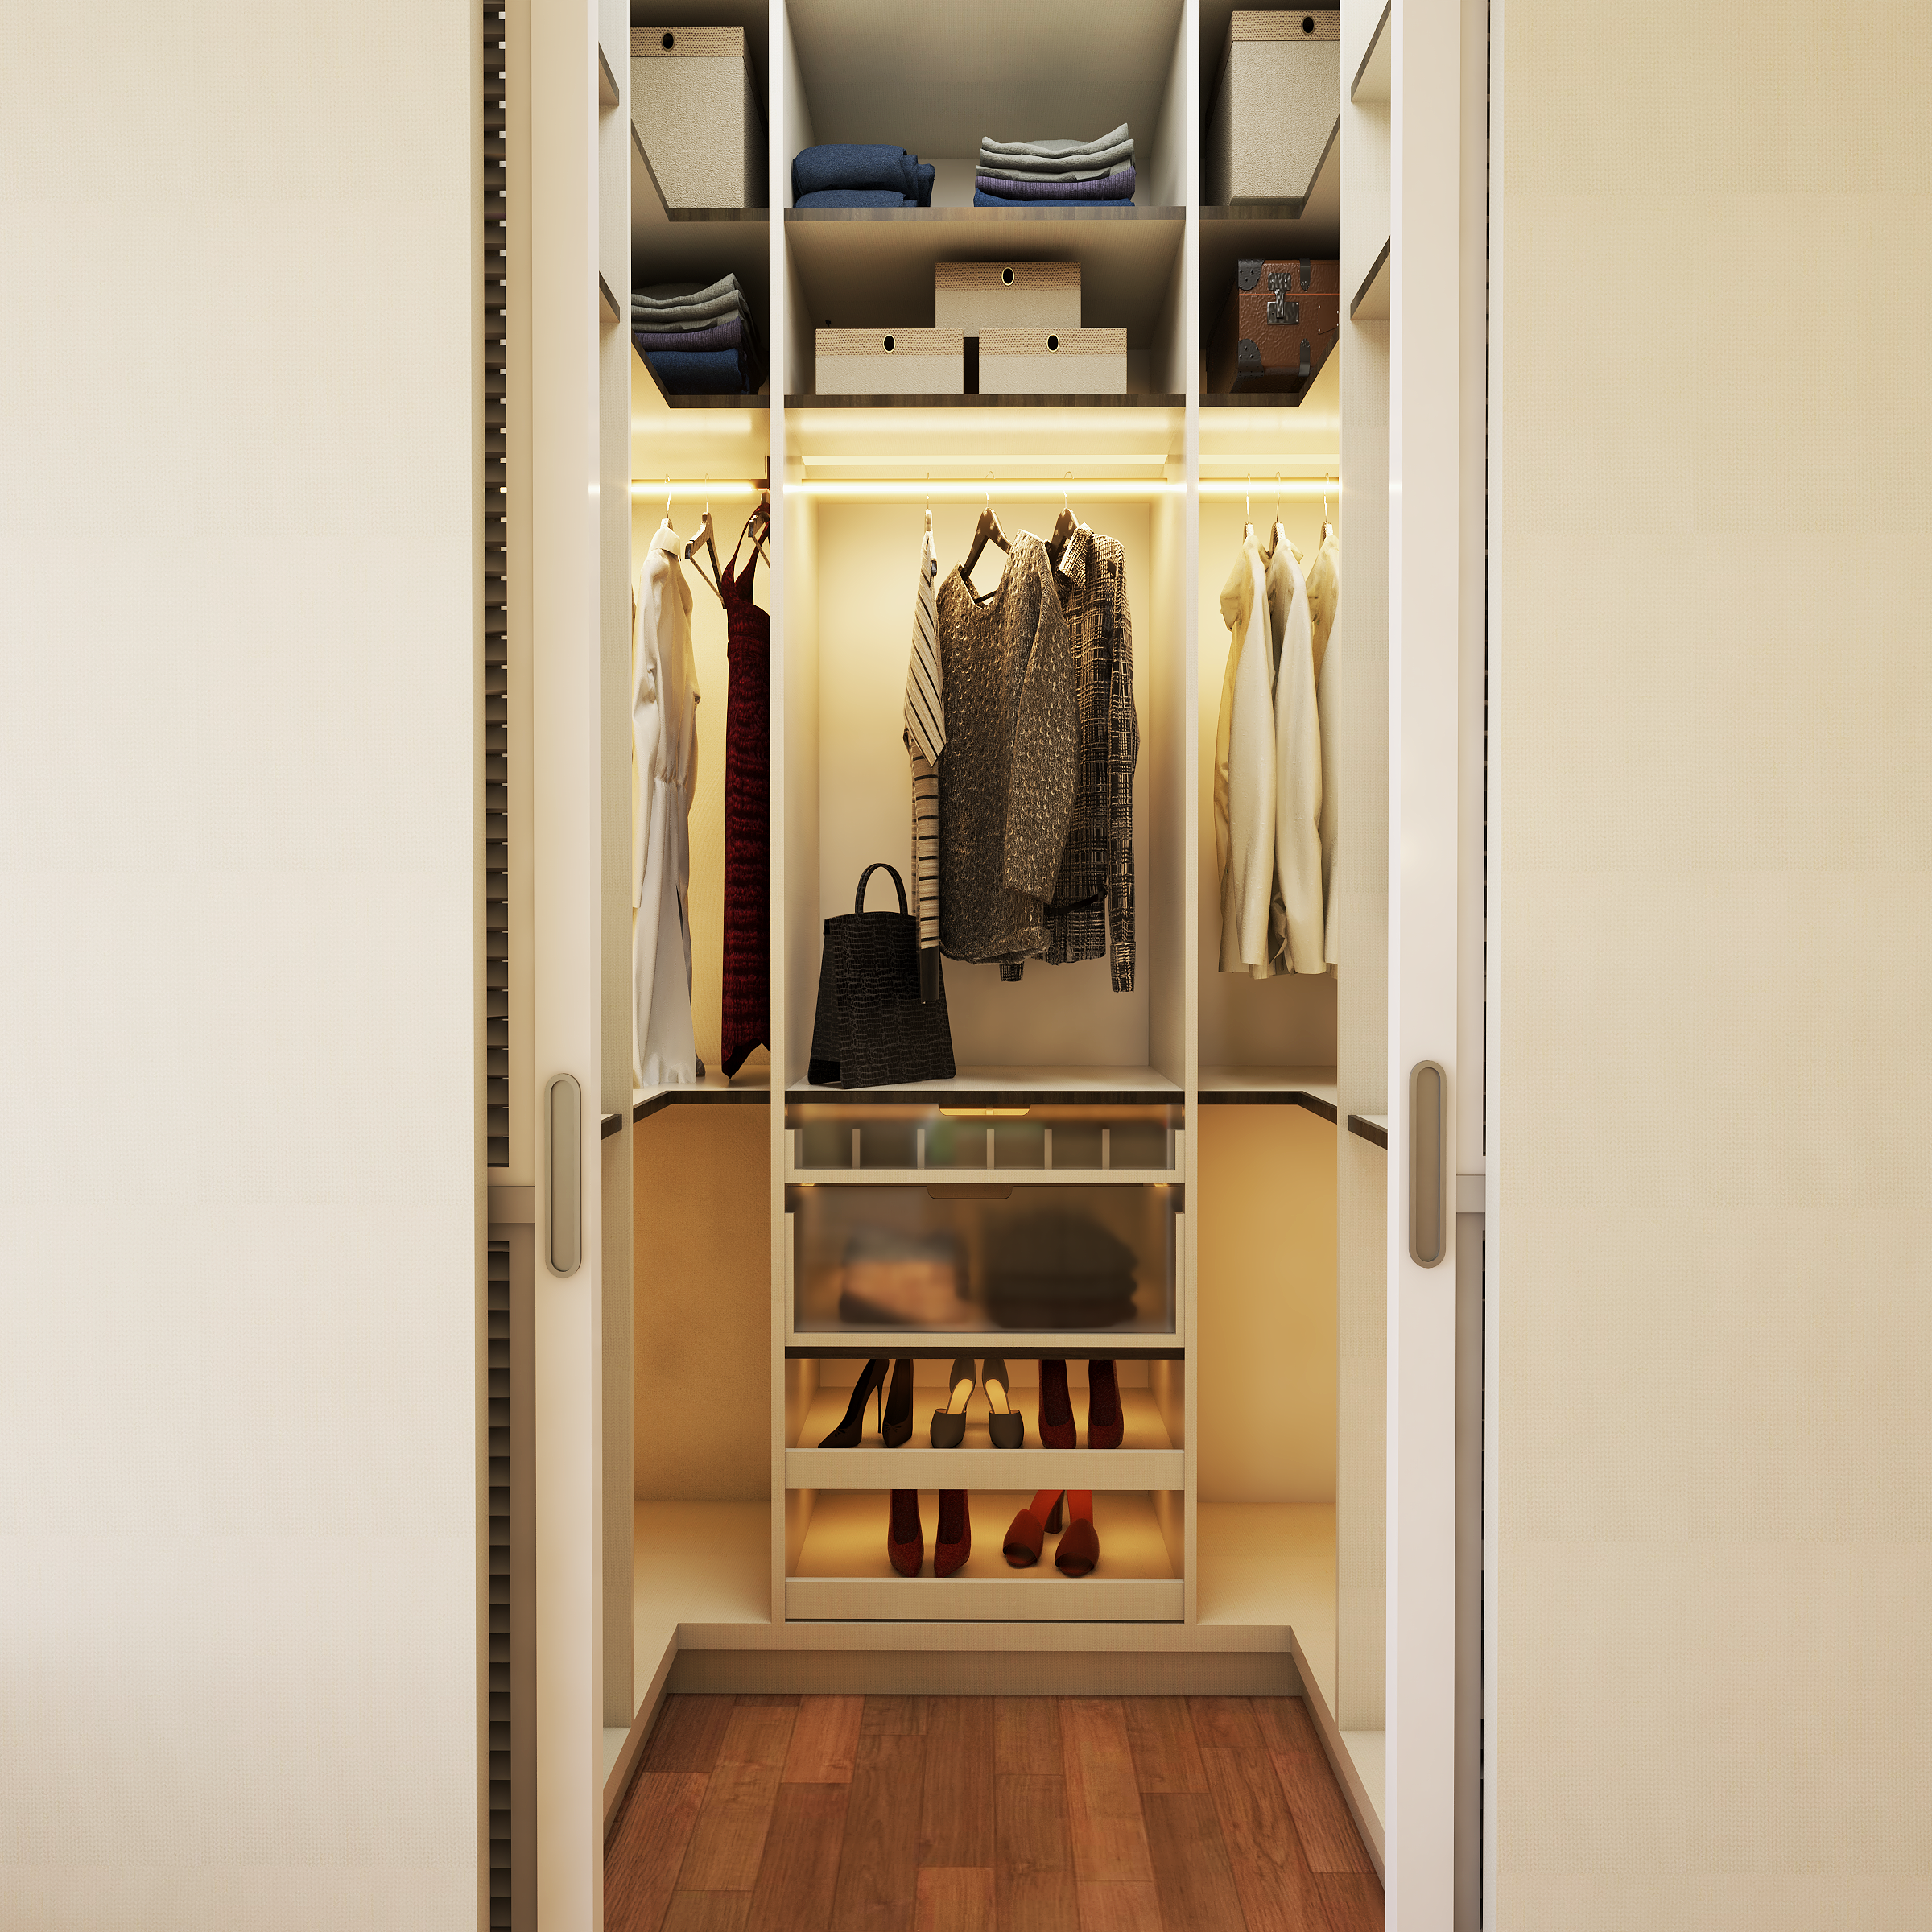 Modern Wardrobe Design With Compact Interior And Strip Lights